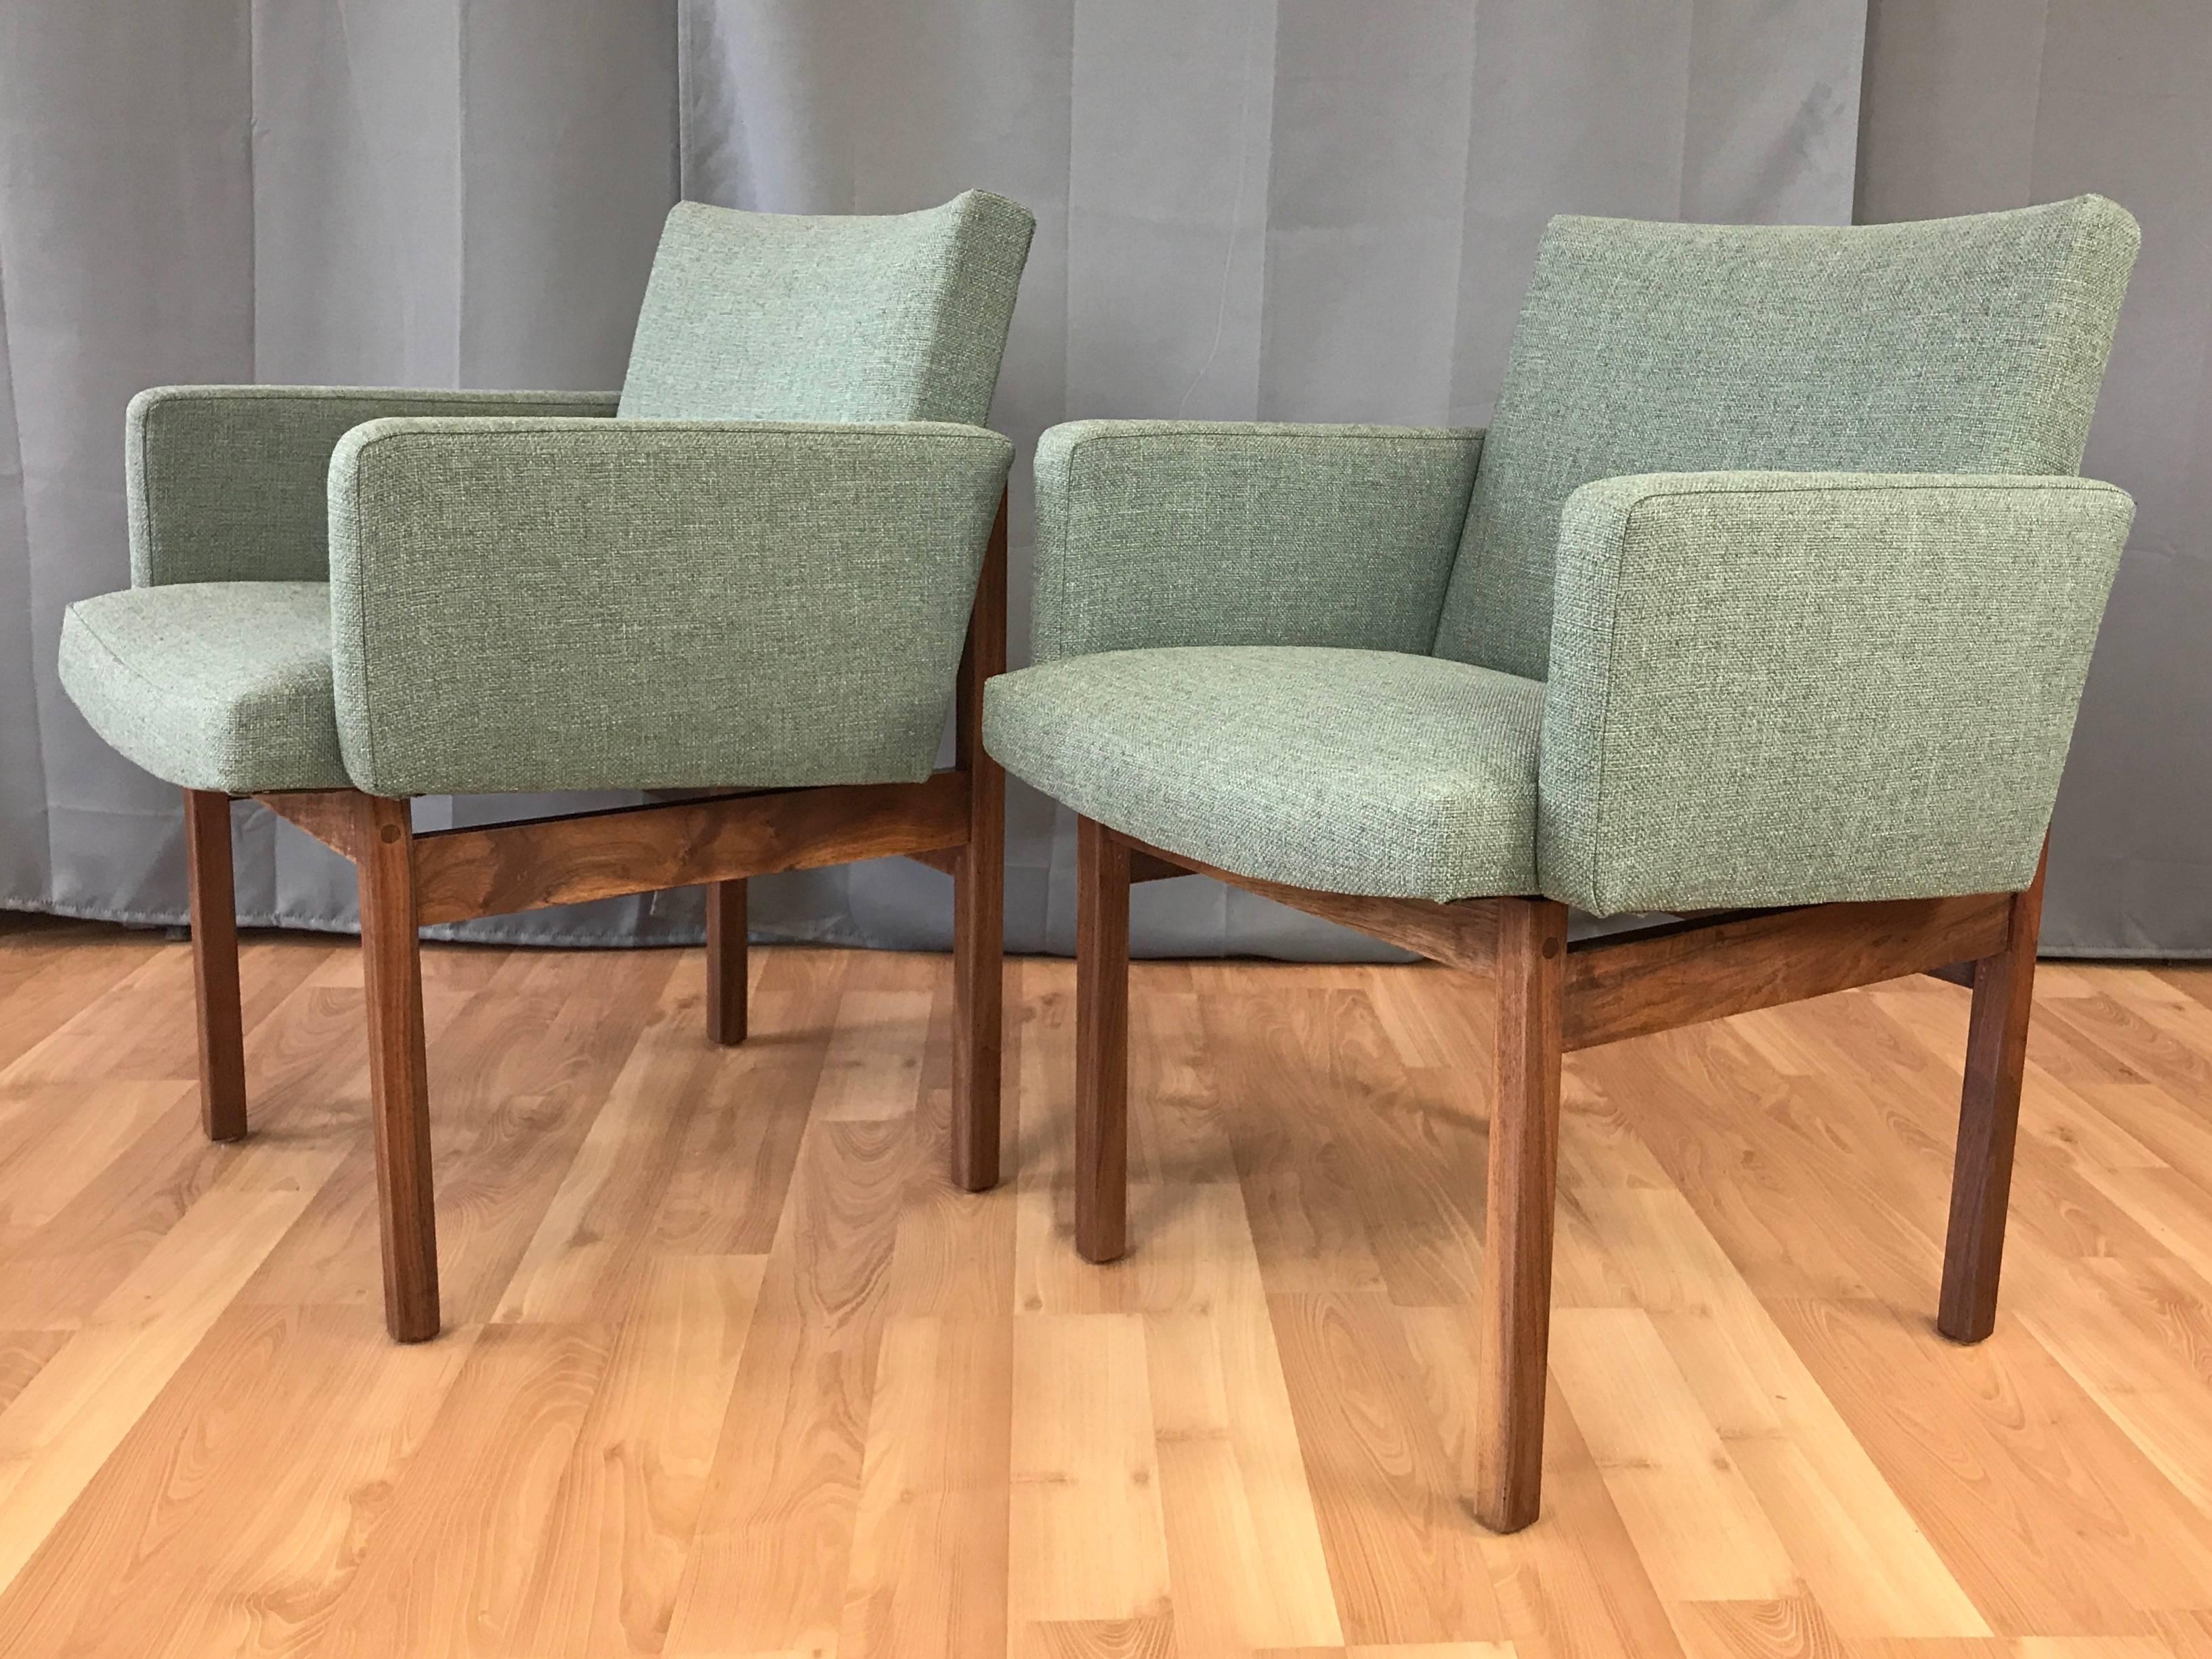 A very handsome pair of midcentury walnut lounge chairs attributed to Jens Risom.

Exceptionally well-crafted solid walnut frame, with crosspieces shaped to perfectly cradle the seat’s gentle curves within its straight, geometric lines. Seat has